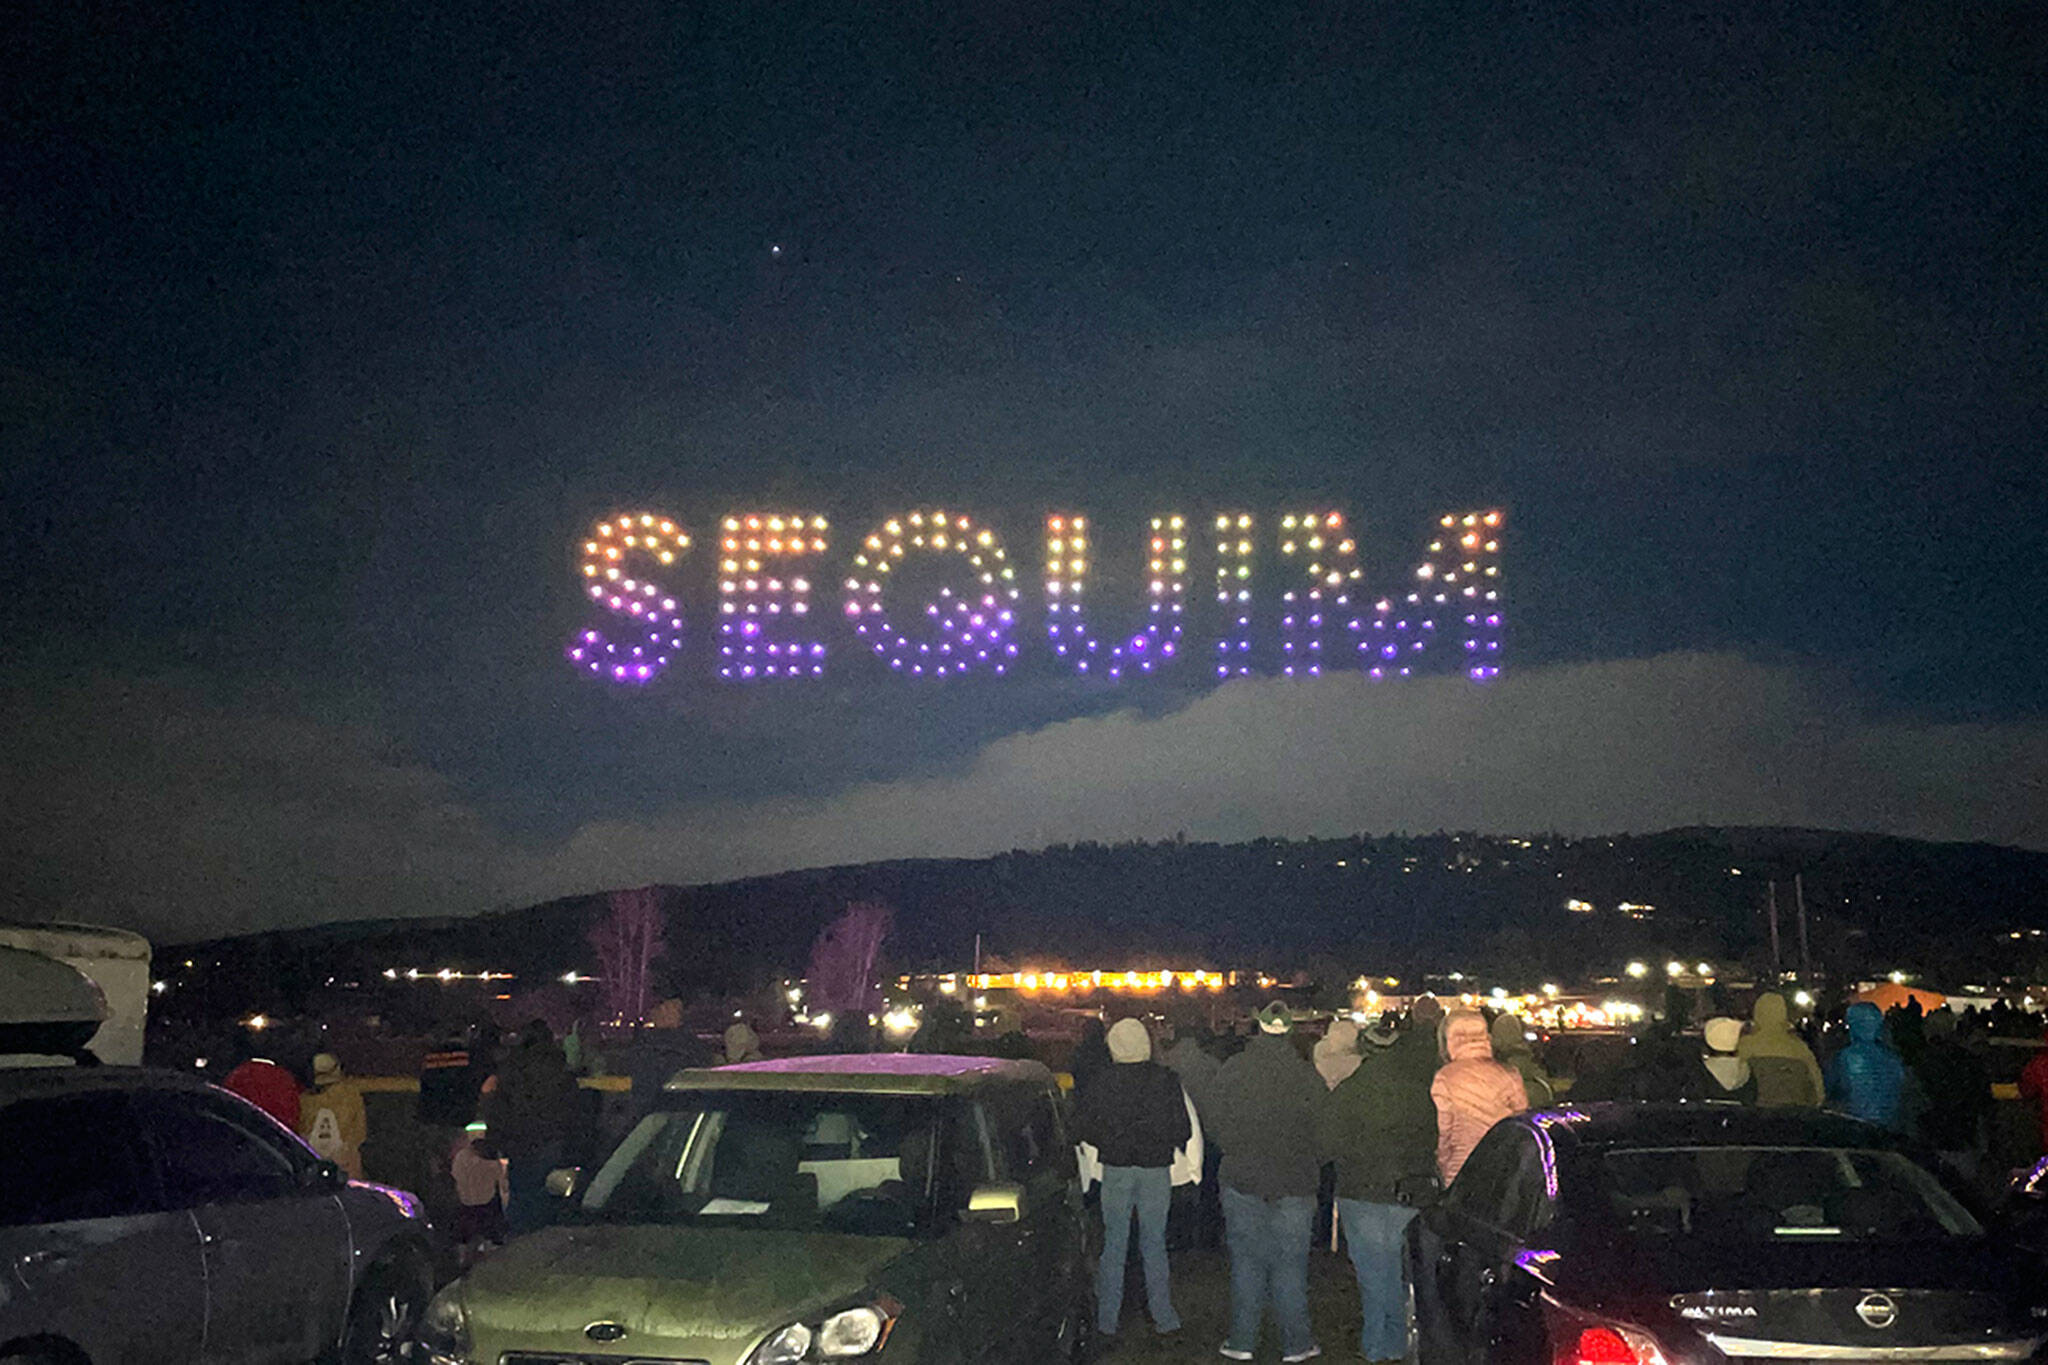 Sequim Gazette photo by Matthew Nash/ A shining “Sequim” made up of 200 drones flies above crowds in and near Carrie Blake Community Park for the Sequim Sunshine Festival’s Illuminated Drone Show.